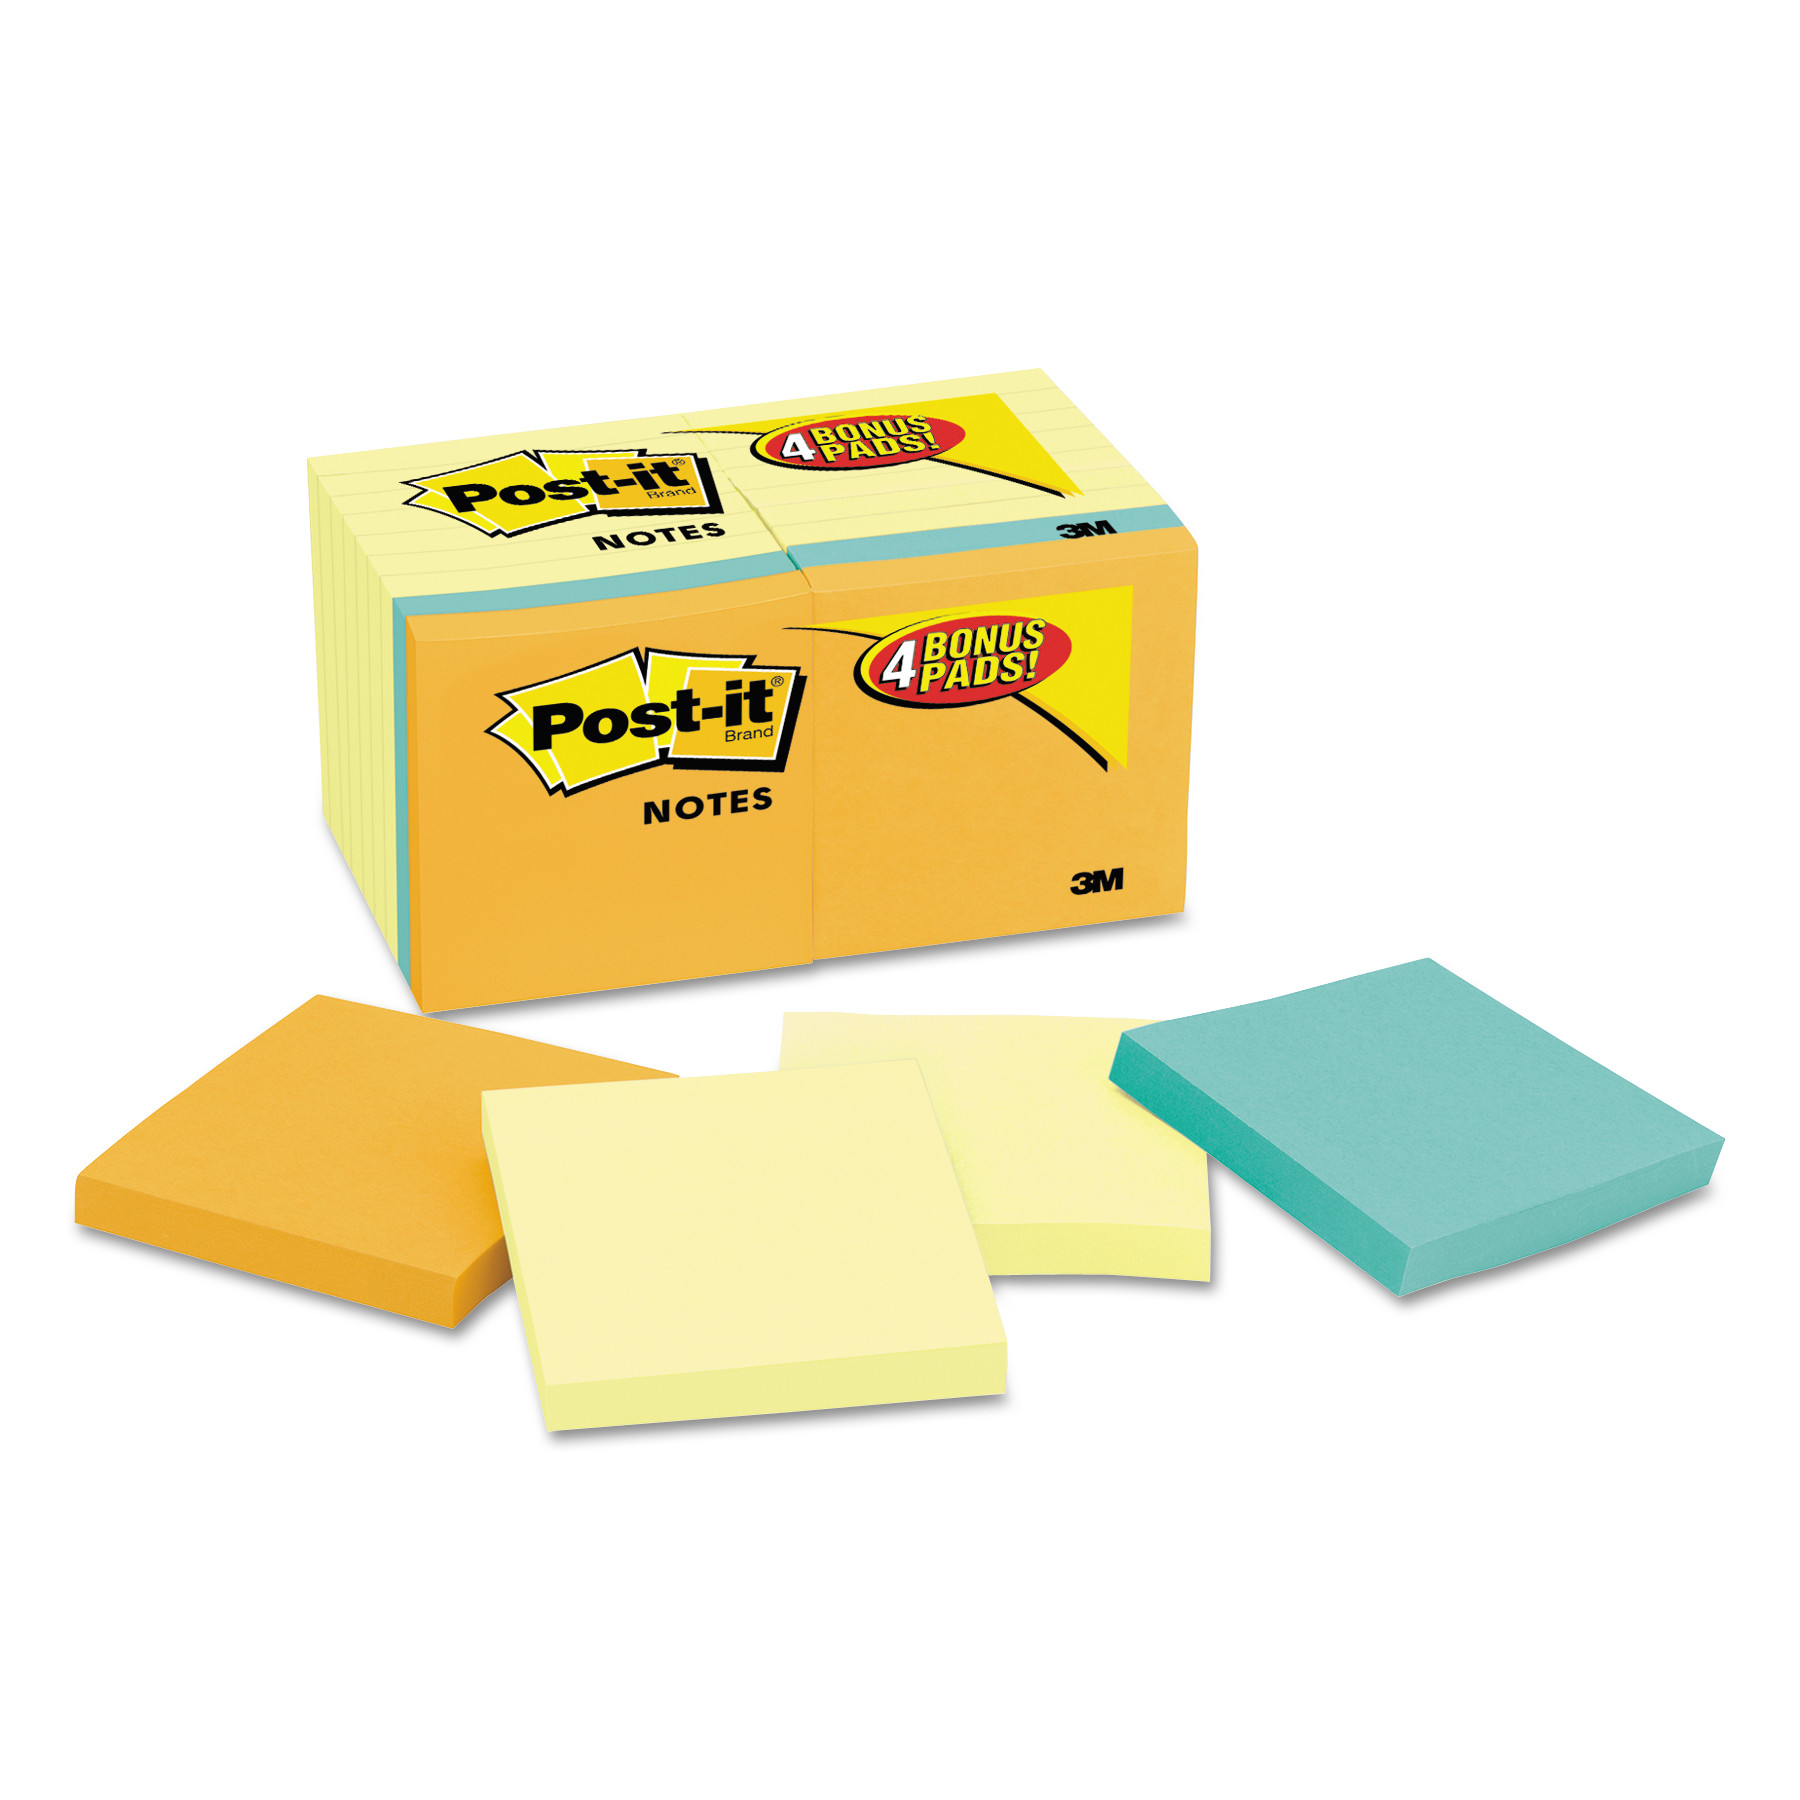 Original Pads Value Pack, 3 x 3, Canary Yellow/Cape Town, 100-Sheet, 18 Pads